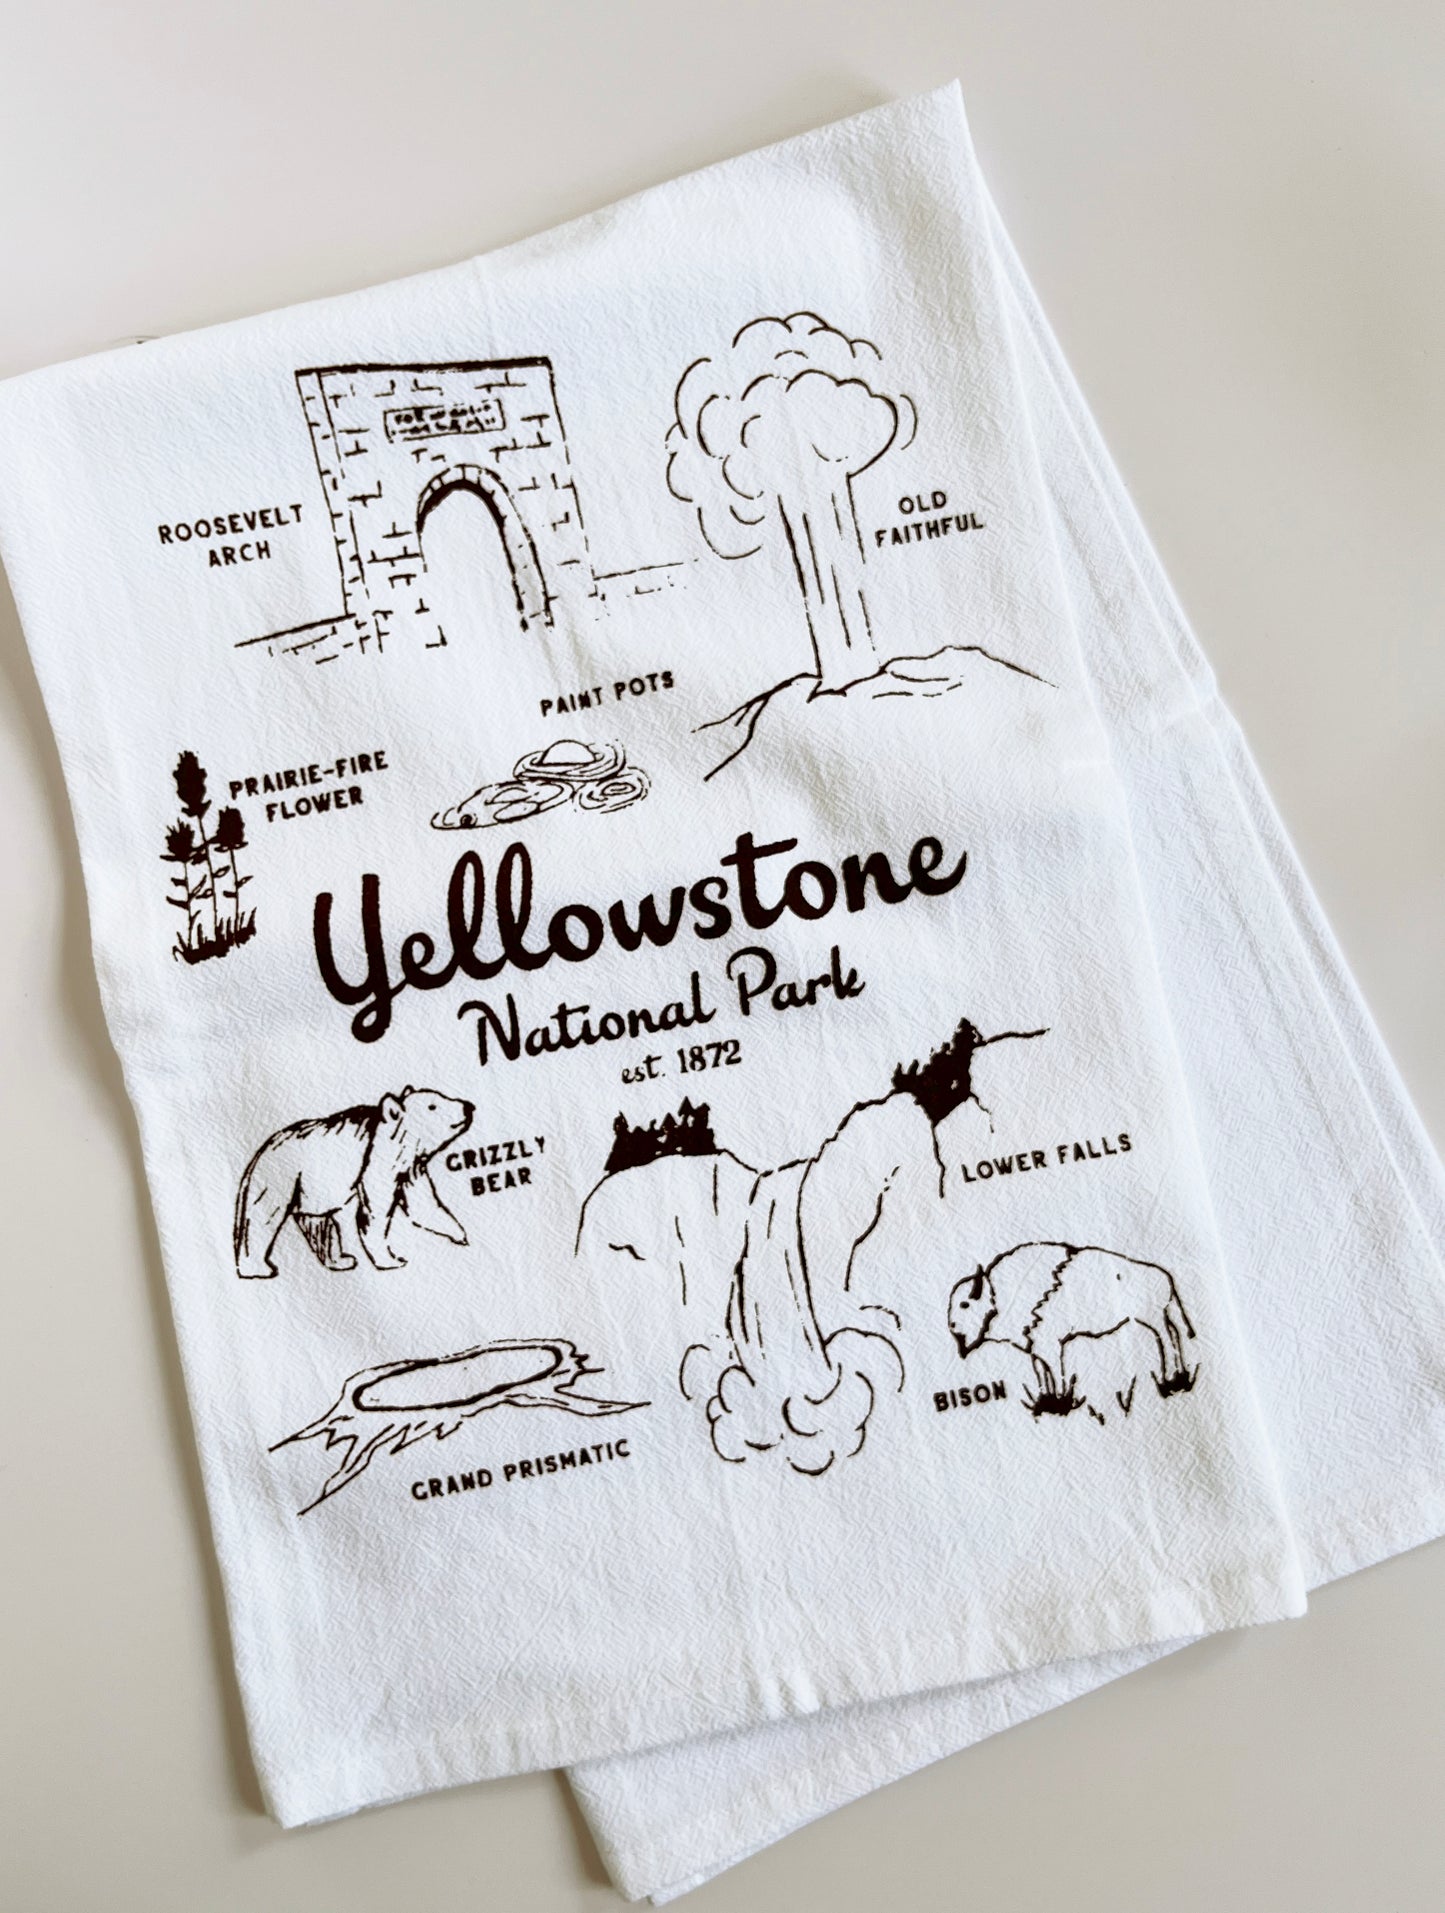 coin laundry yellowstone national park cotton kitchen towel vintage style national park home decor bear old faithful bison wyoming montana souvenir fun tea towels coin laundry montana 